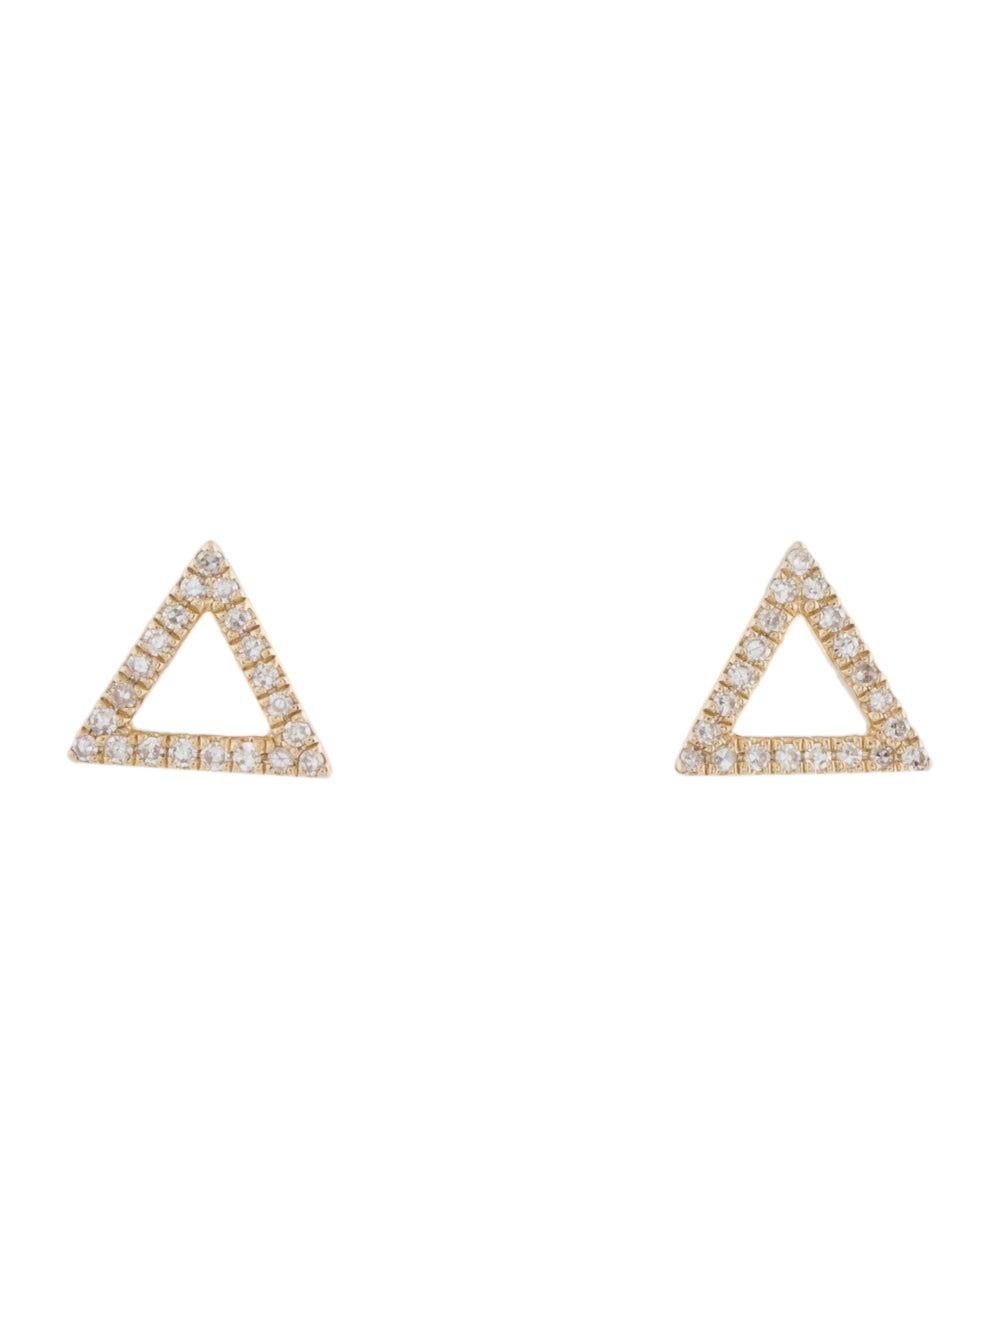 Open Triangle Earrings: Crafted of real 14k gold, these popular Open Triangle shape earrings feature 42 natural white sparkling diamonds approximately 0.12 ct. Certified diamonds. Diamond Color & Clarity GH-SI1 Measures approximately 1/2 Inch.